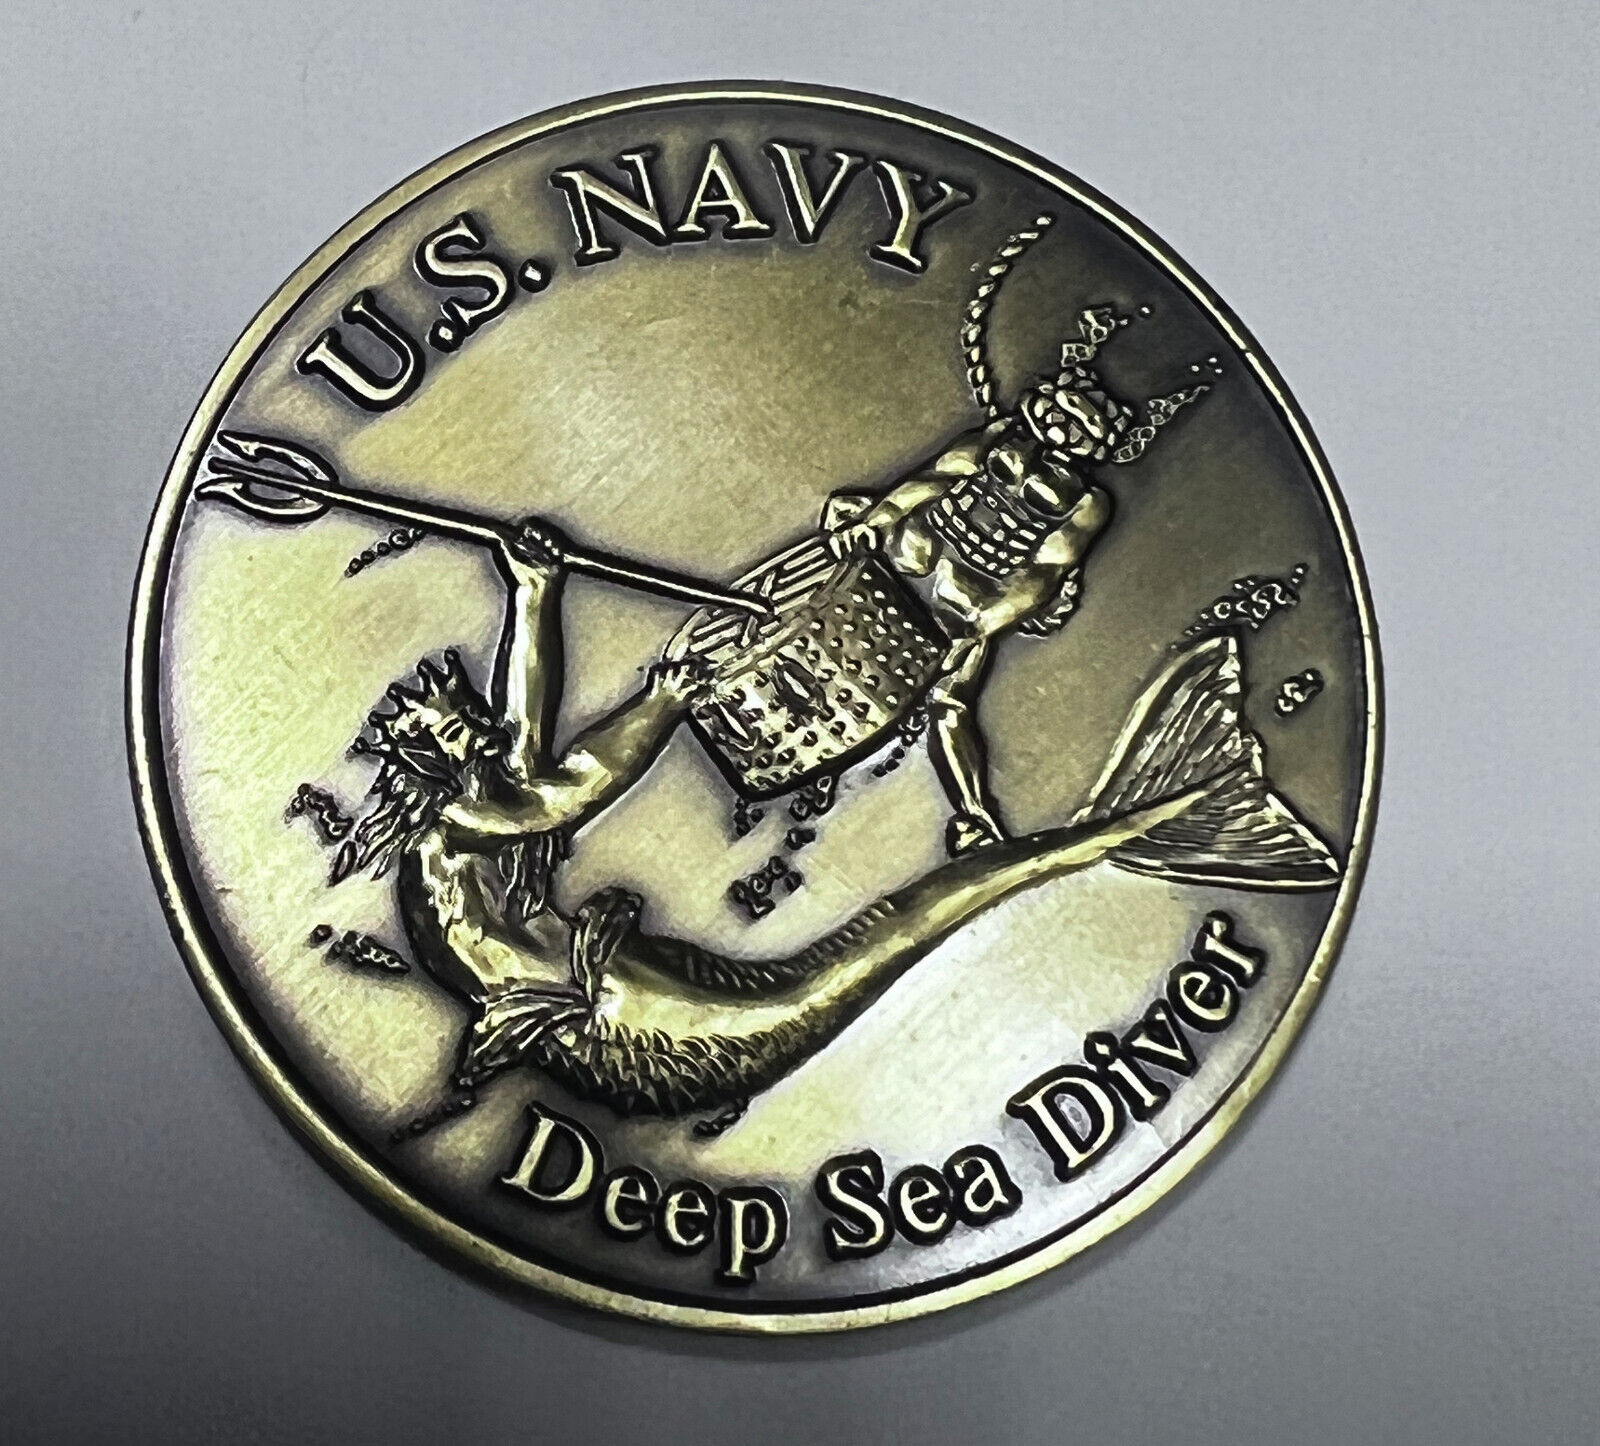 us navy deep sea diver research & recovery rare authentic challenge coin w/coa